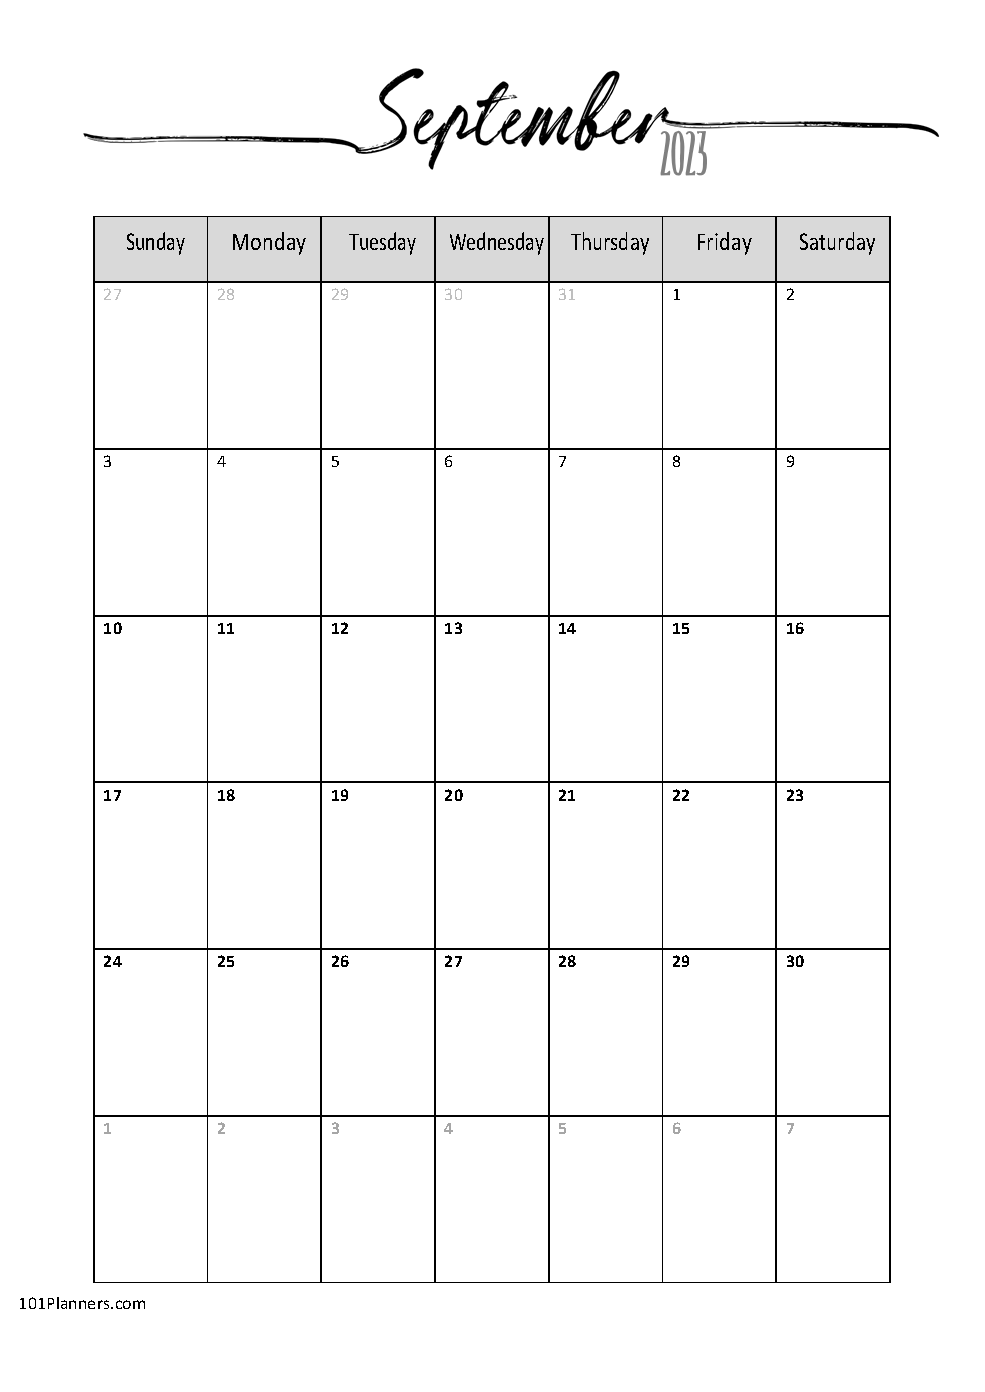 FREE Blank Calendar Templates Word, Excel, PDF for any month